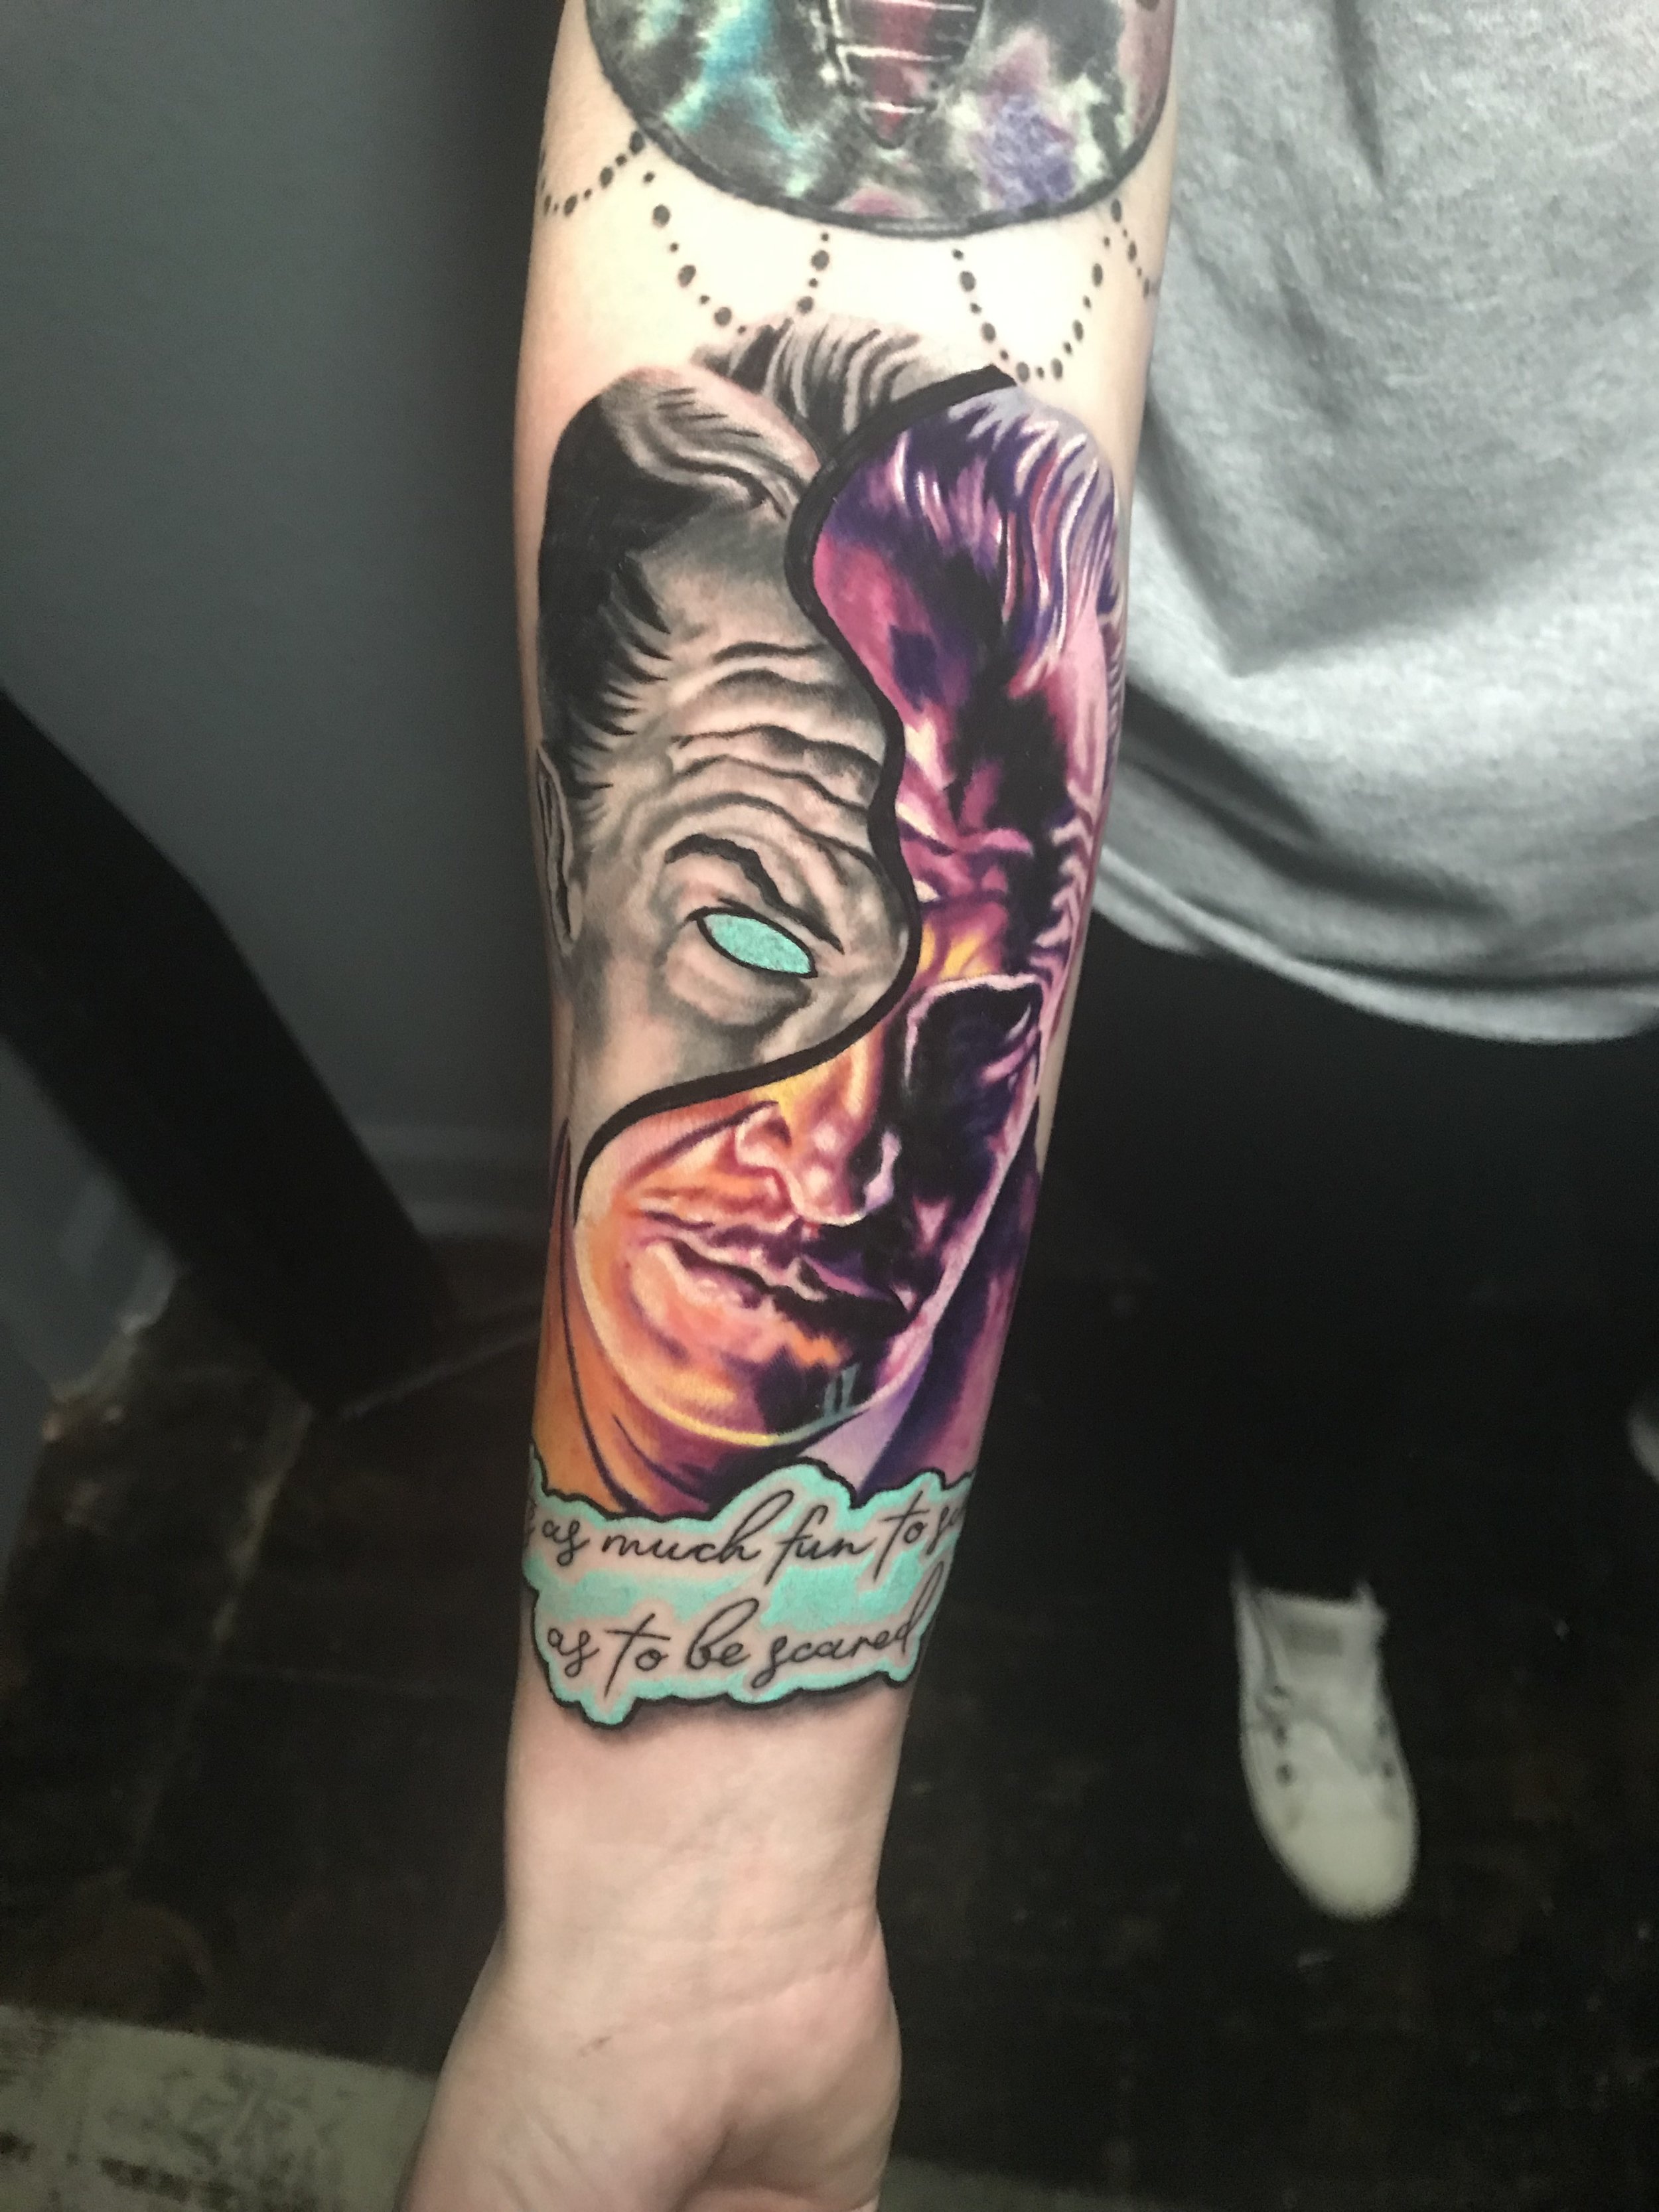 two face coin tattoo by pnutink on DeviantArt